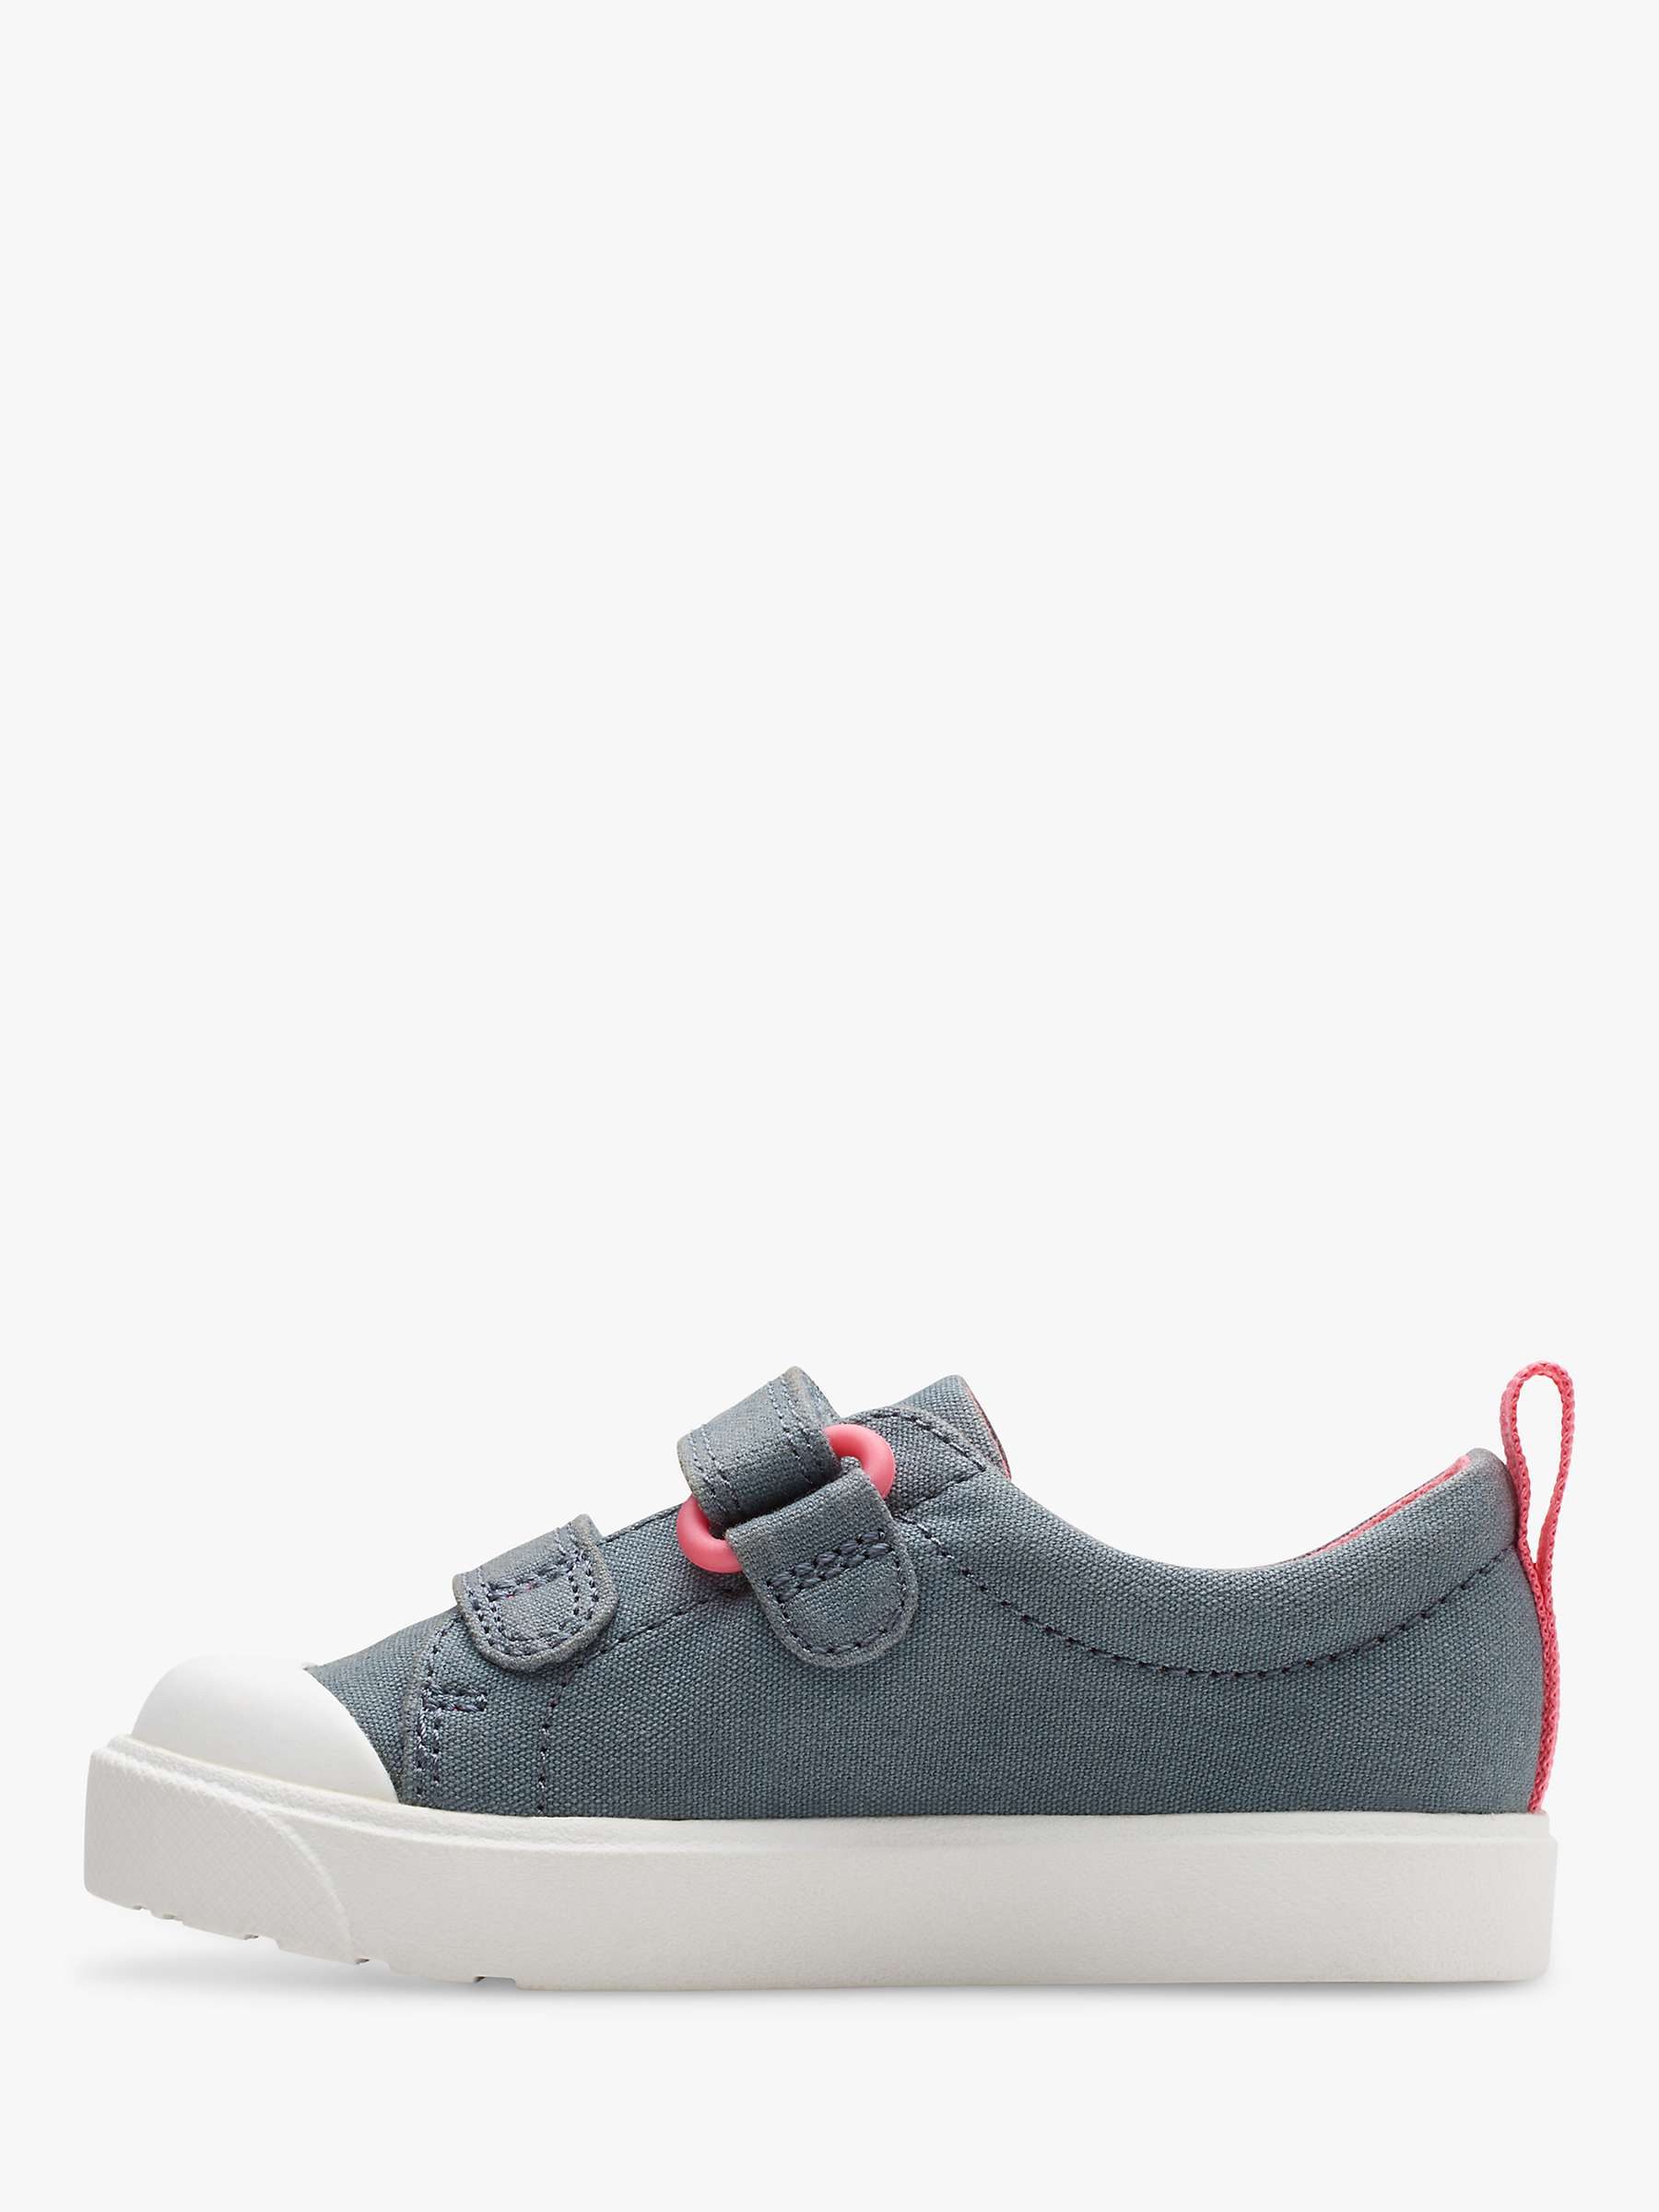 Buy Clarks Kids' City Bright Canvas Floral Embroidered Trainers, Blue Online at johnlewis.com